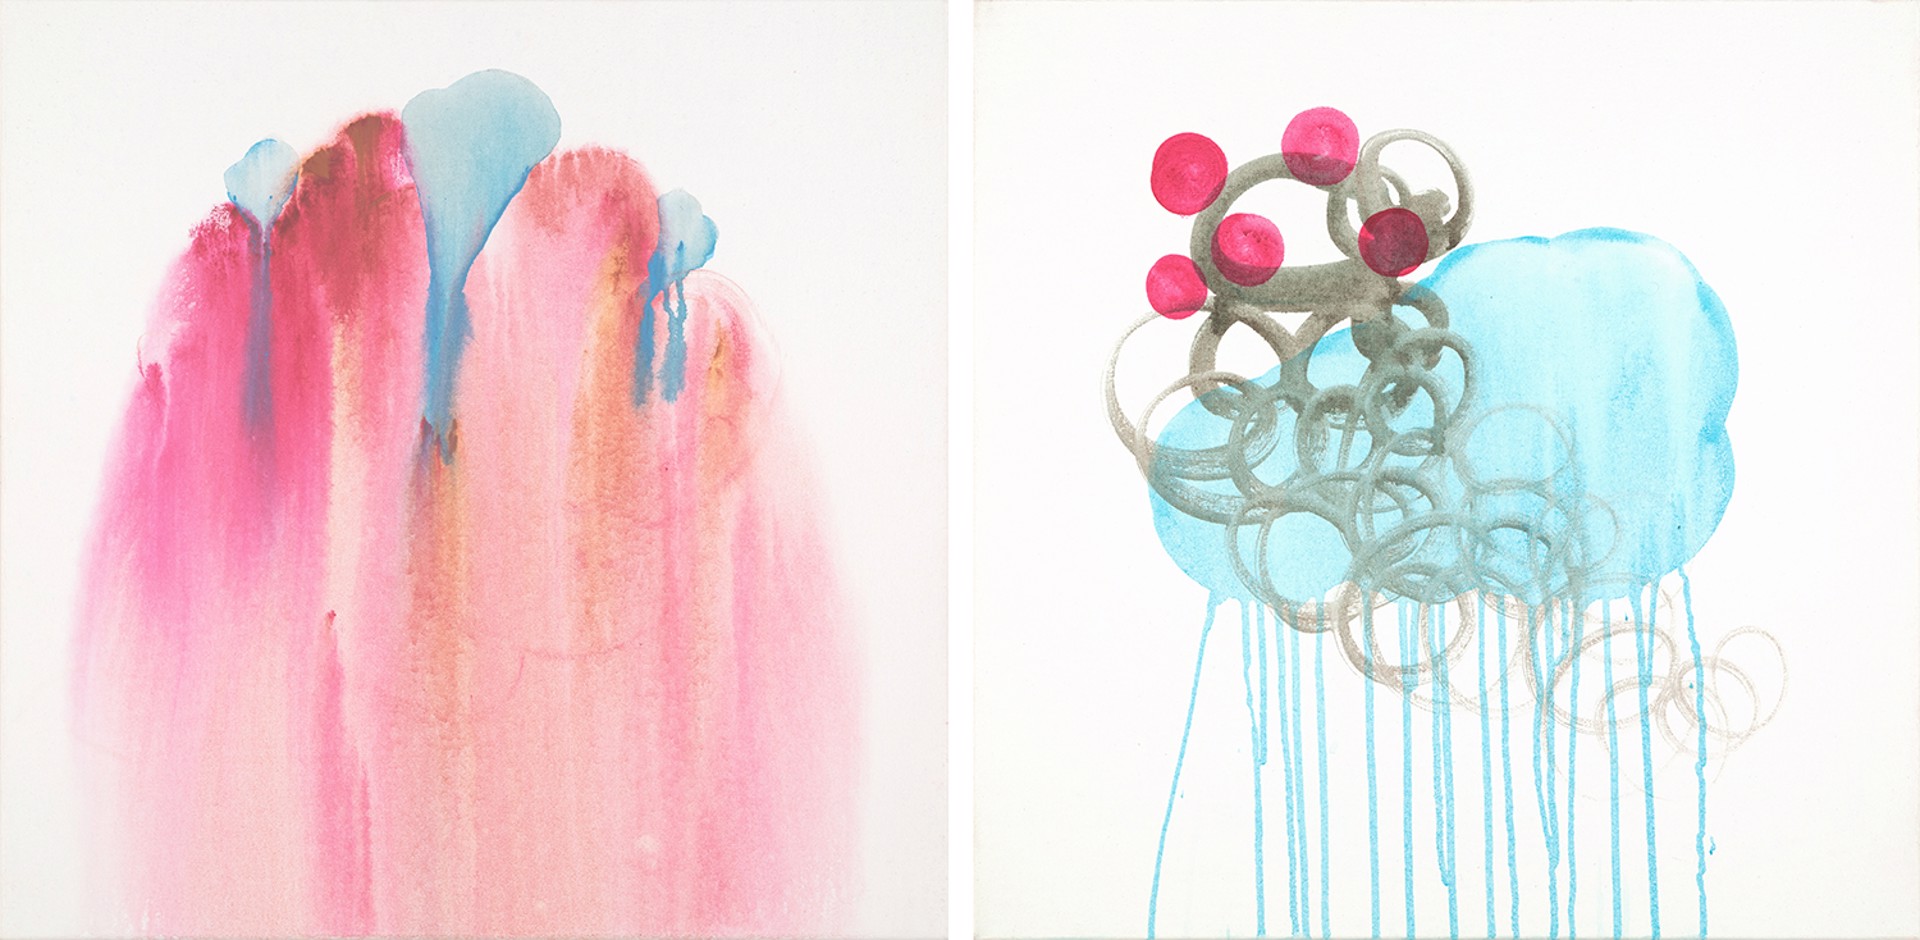 Tumble and Swell Diptych by Shawn Hall